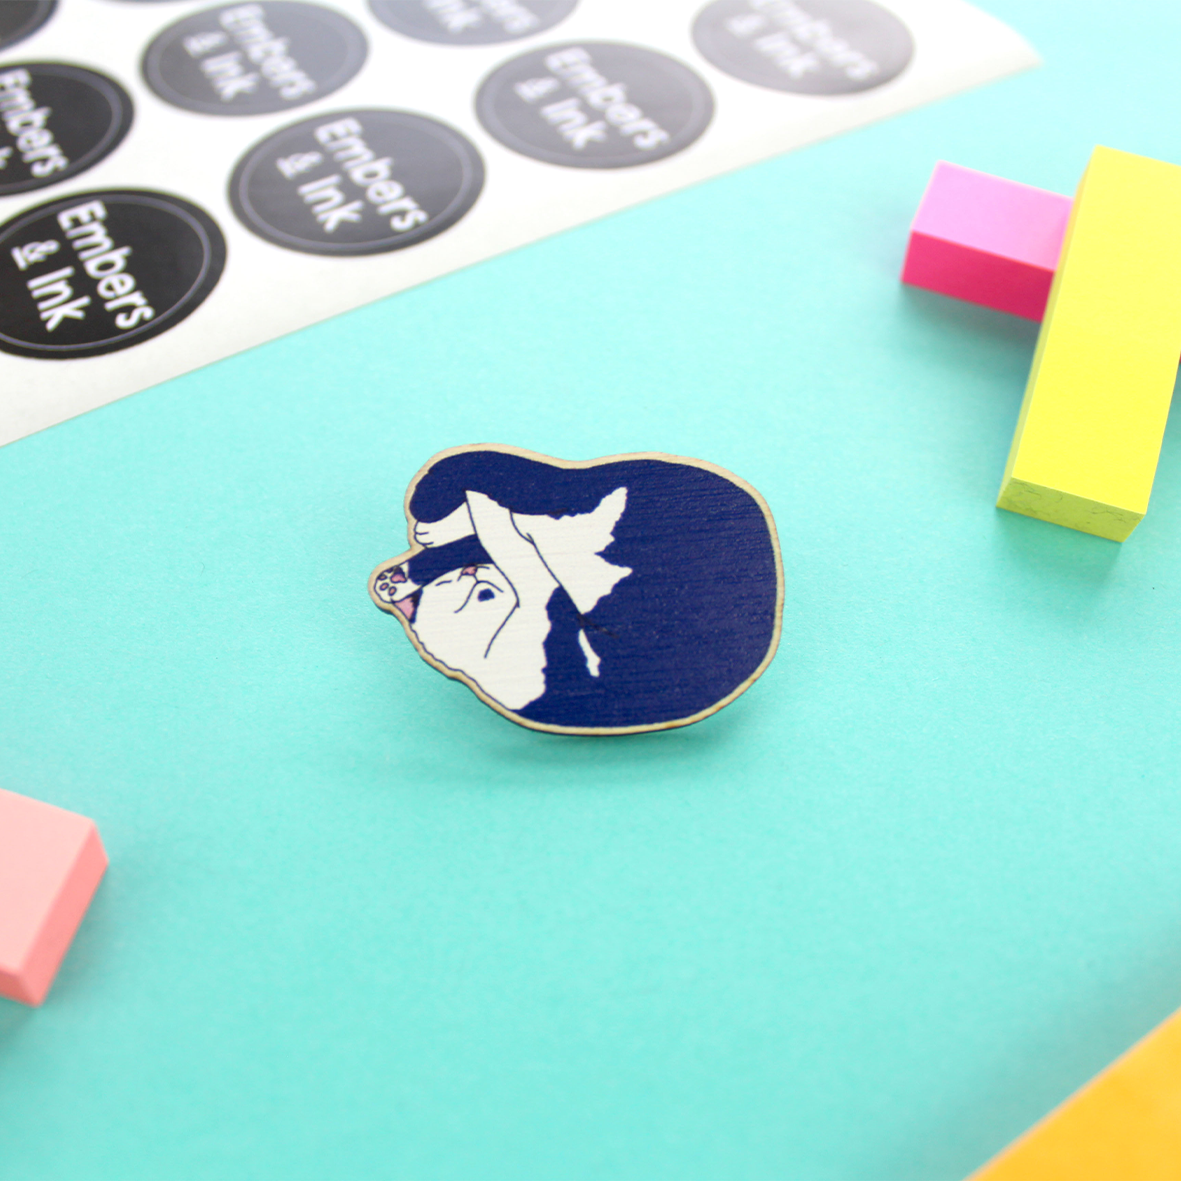 A wooden pin featuring a cute sleeping cat that is all curled up is shown on a table. The cat is blue and white with a pink nose and is drawn in a realistic style..